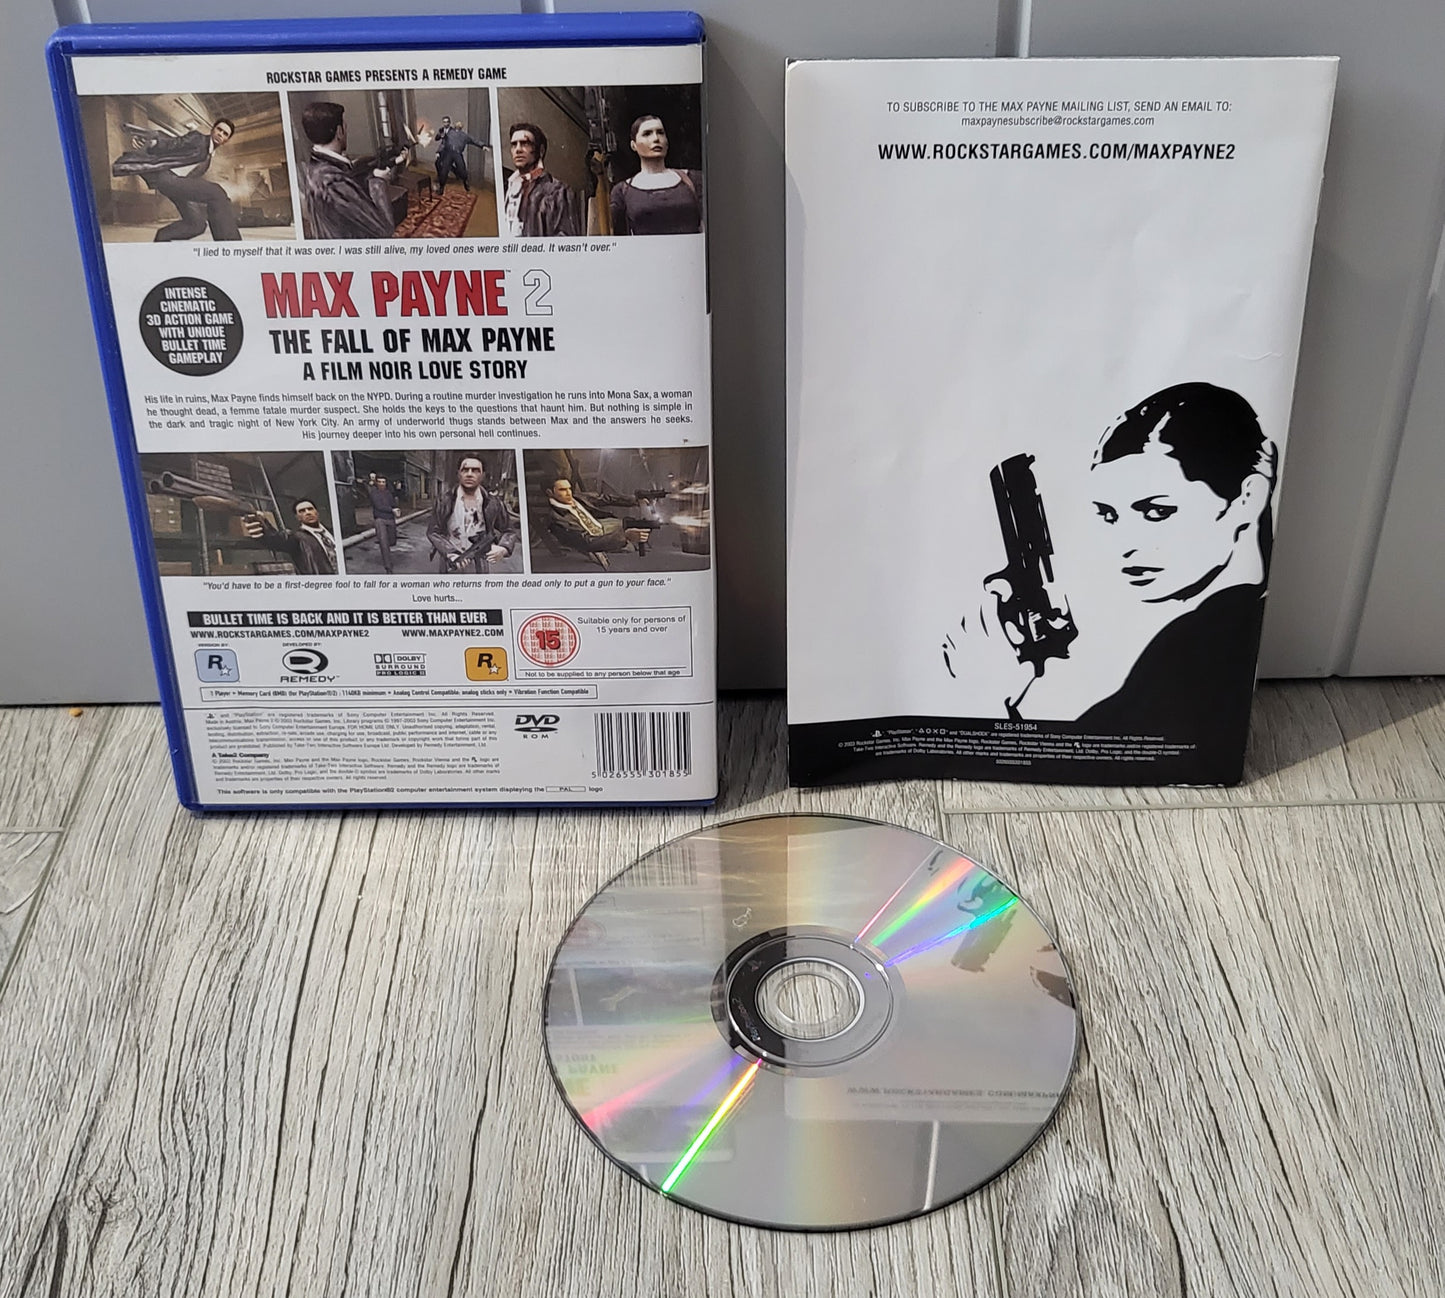 Max Payne 2 the Fall of Max Payne Sony Playstation 2 (PS2) Game